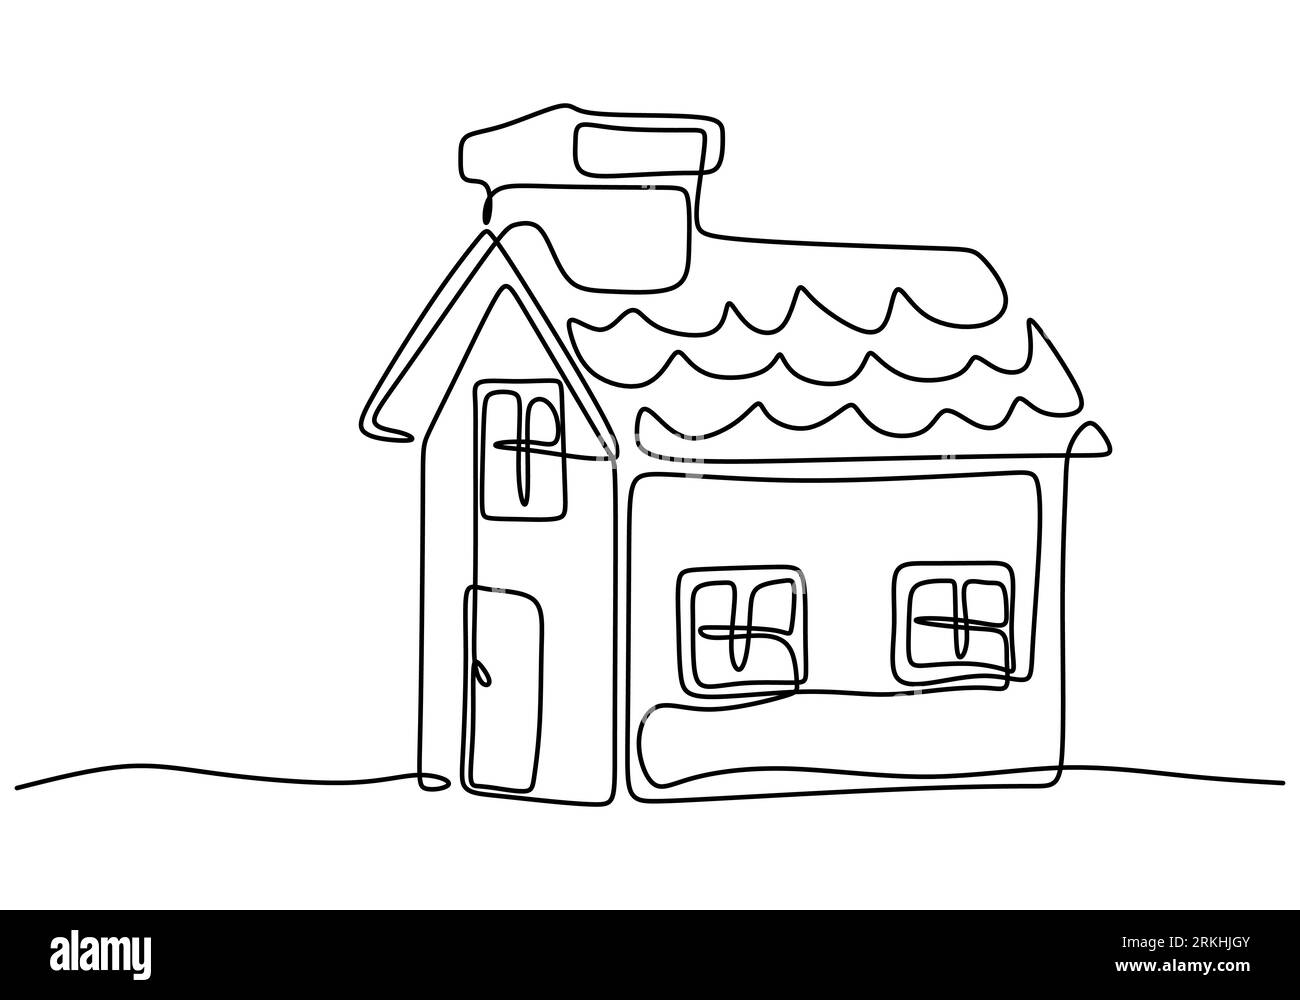 One continuous line drawing of simple house with a chimneys. Family home minimalist sketch linear design isolated on white background. Home exterior c Stock Vector